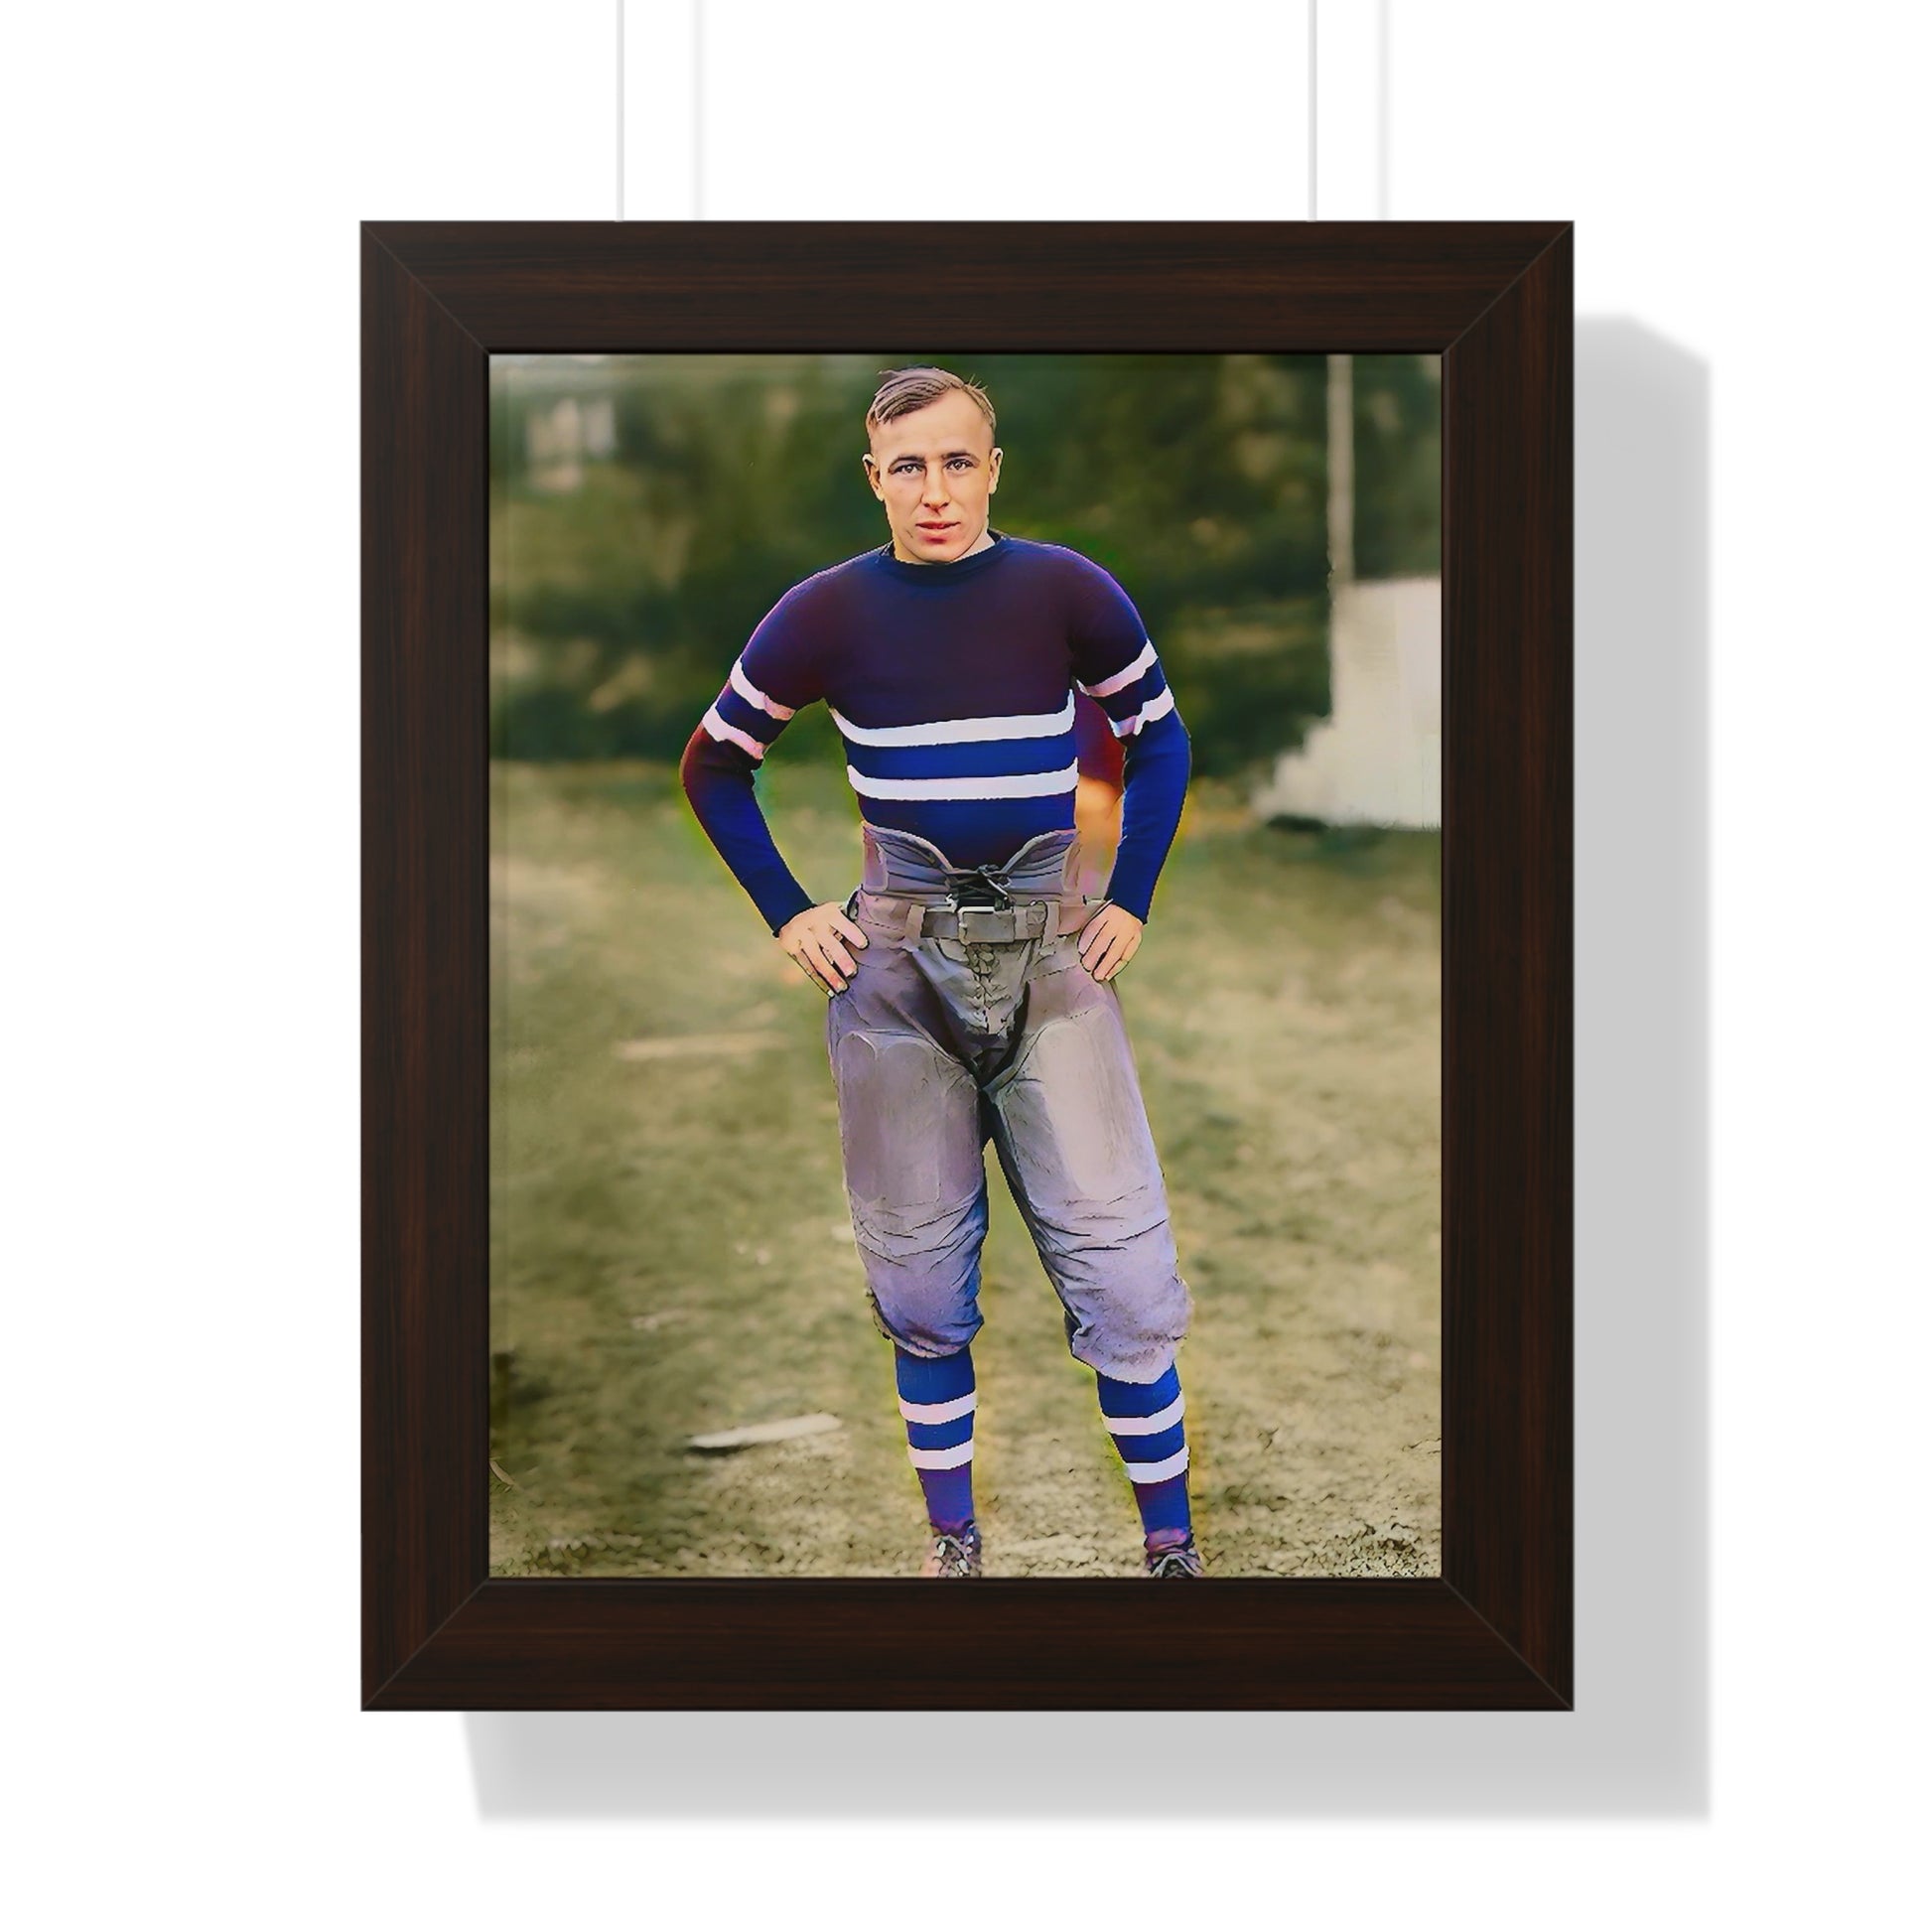 celibataire 015 | Framed Poster Vintage Football Player Pads 1910 High School Gay Queer LGBTQ Hot